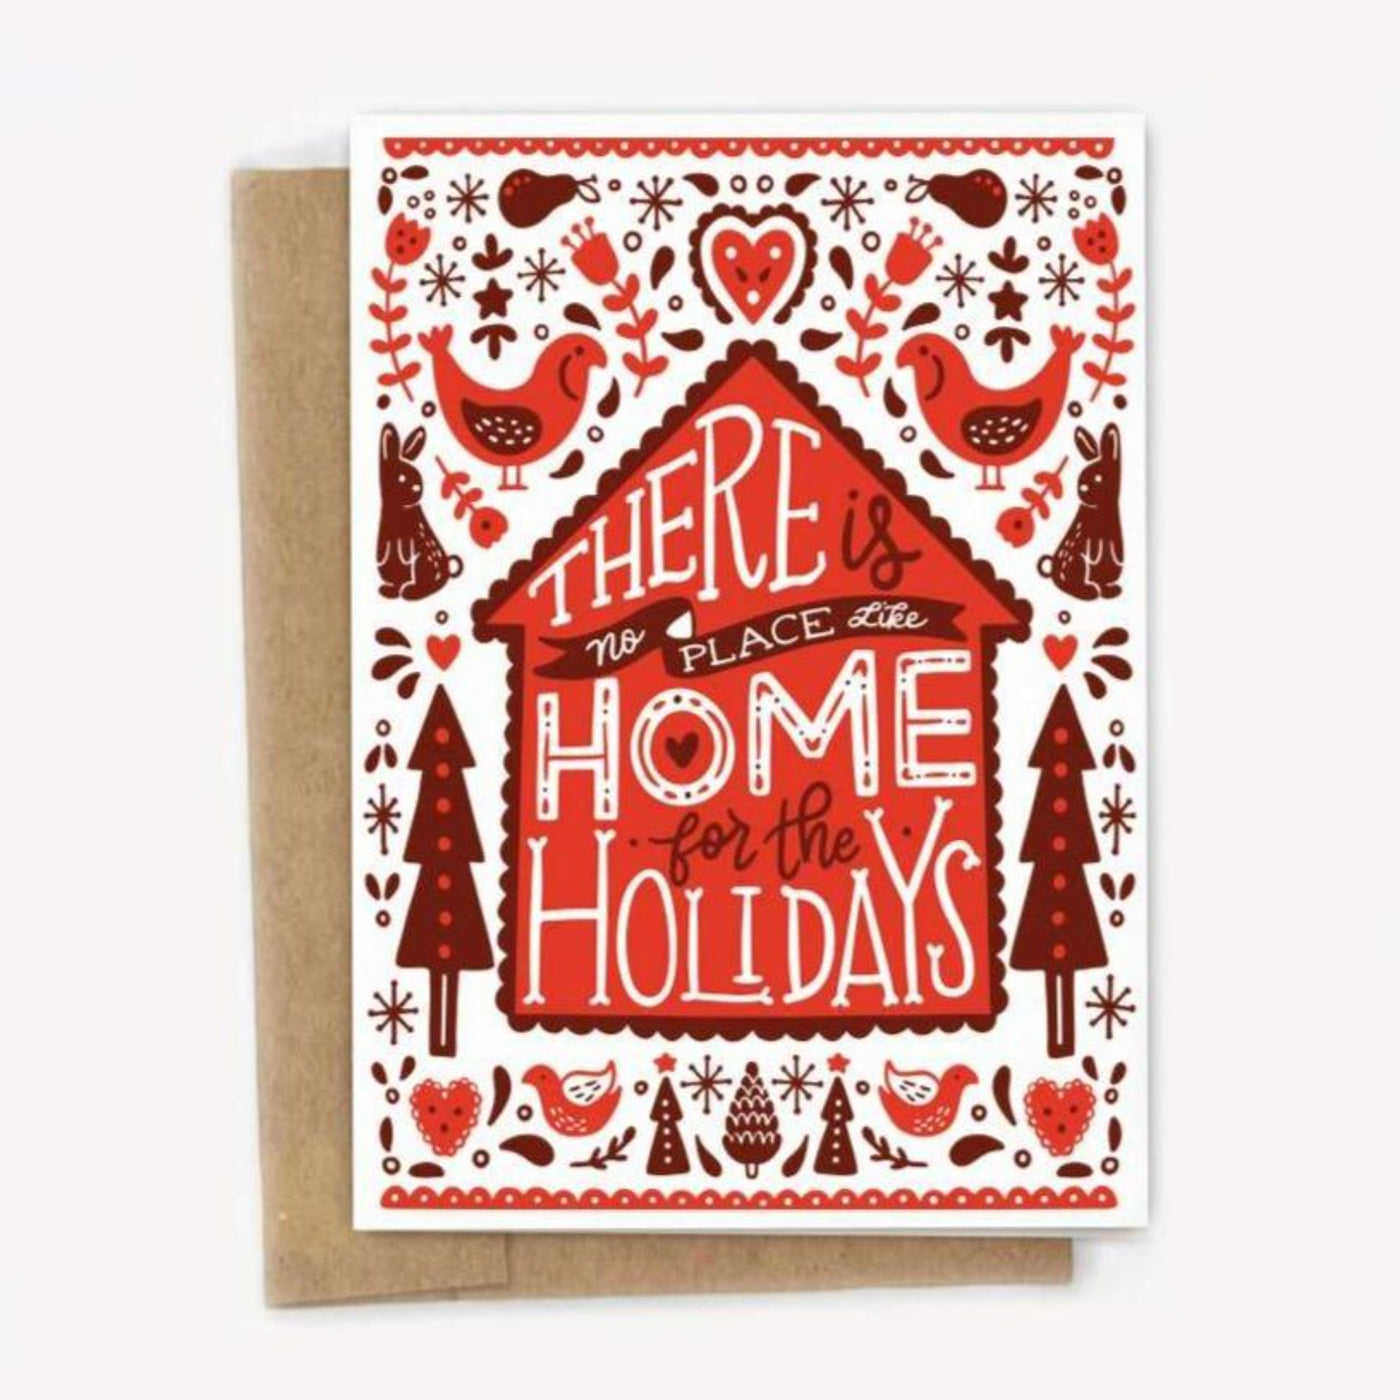 There is No Place Like Home for the Holidays Card